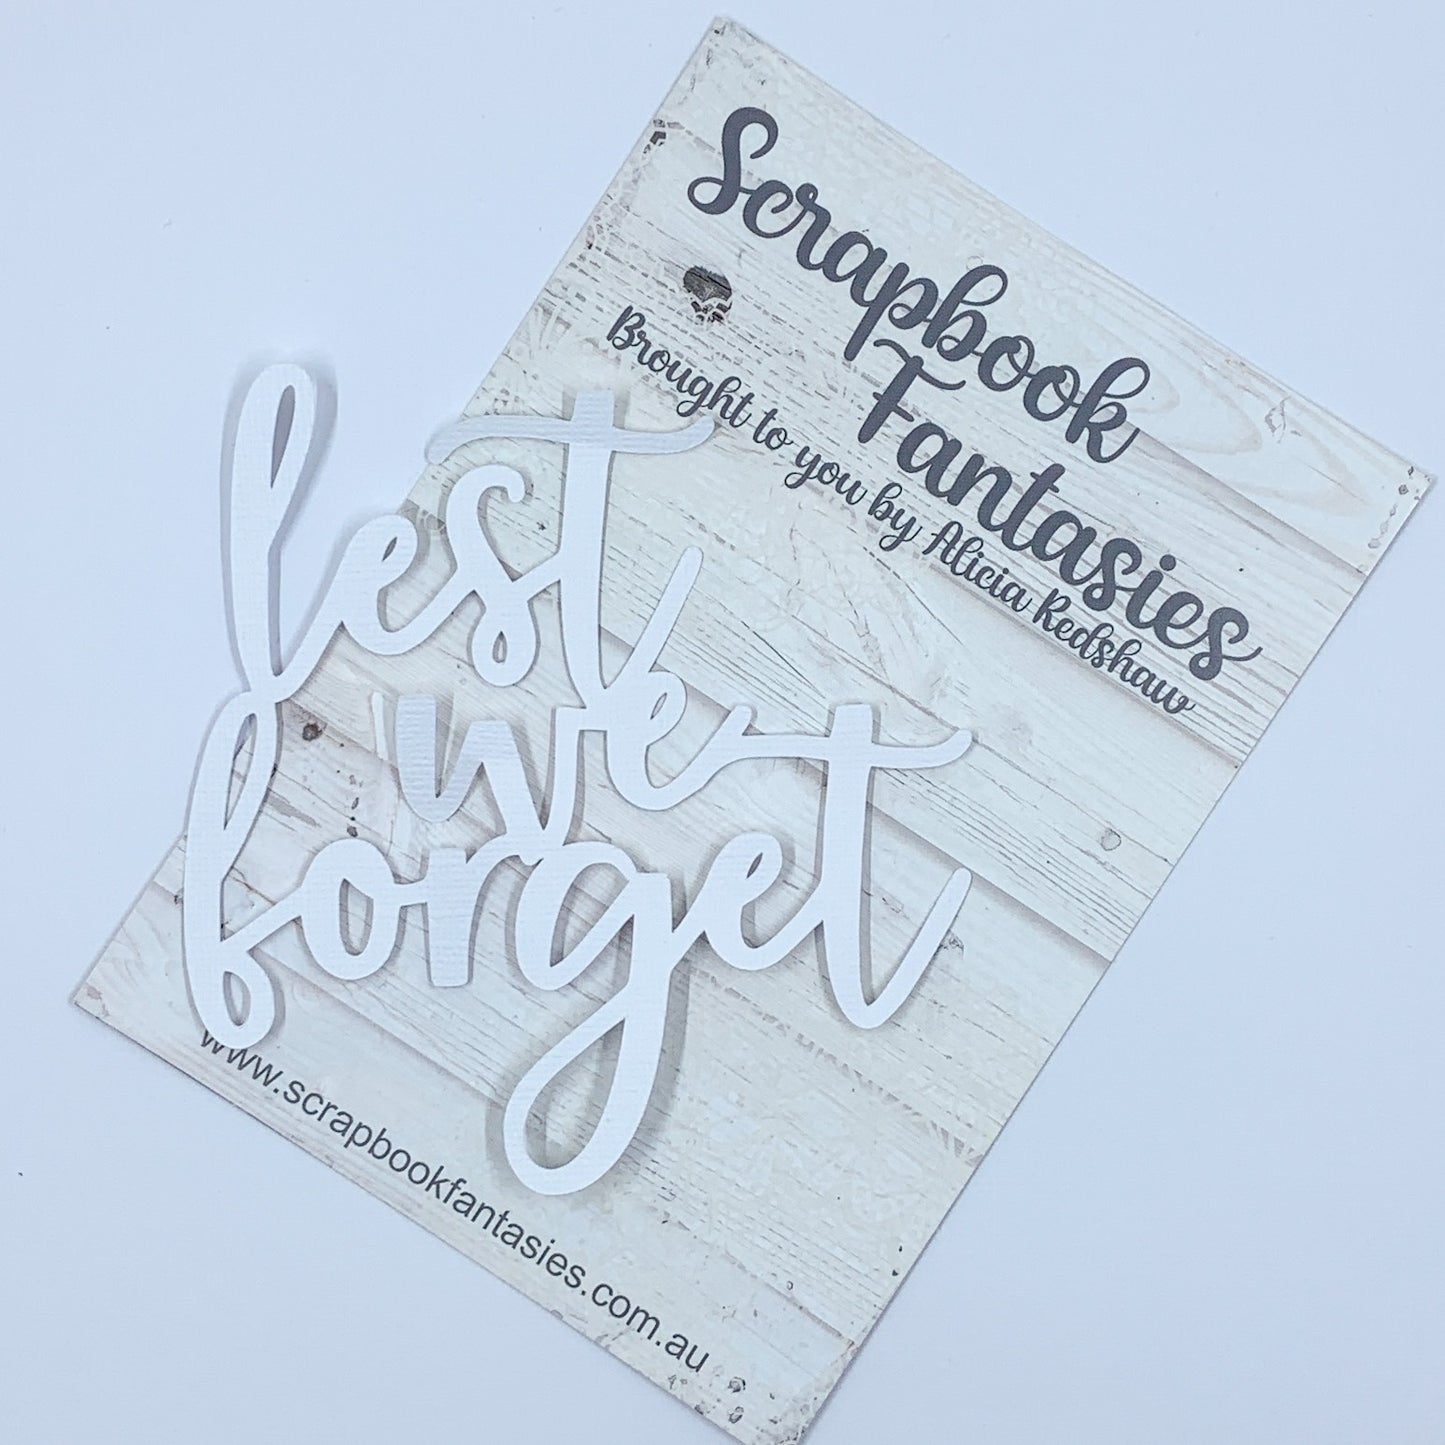 Lest we forget4.25"x4.25" White Linen Cardstock Title-Cut - Designed by Alicia Redshaw